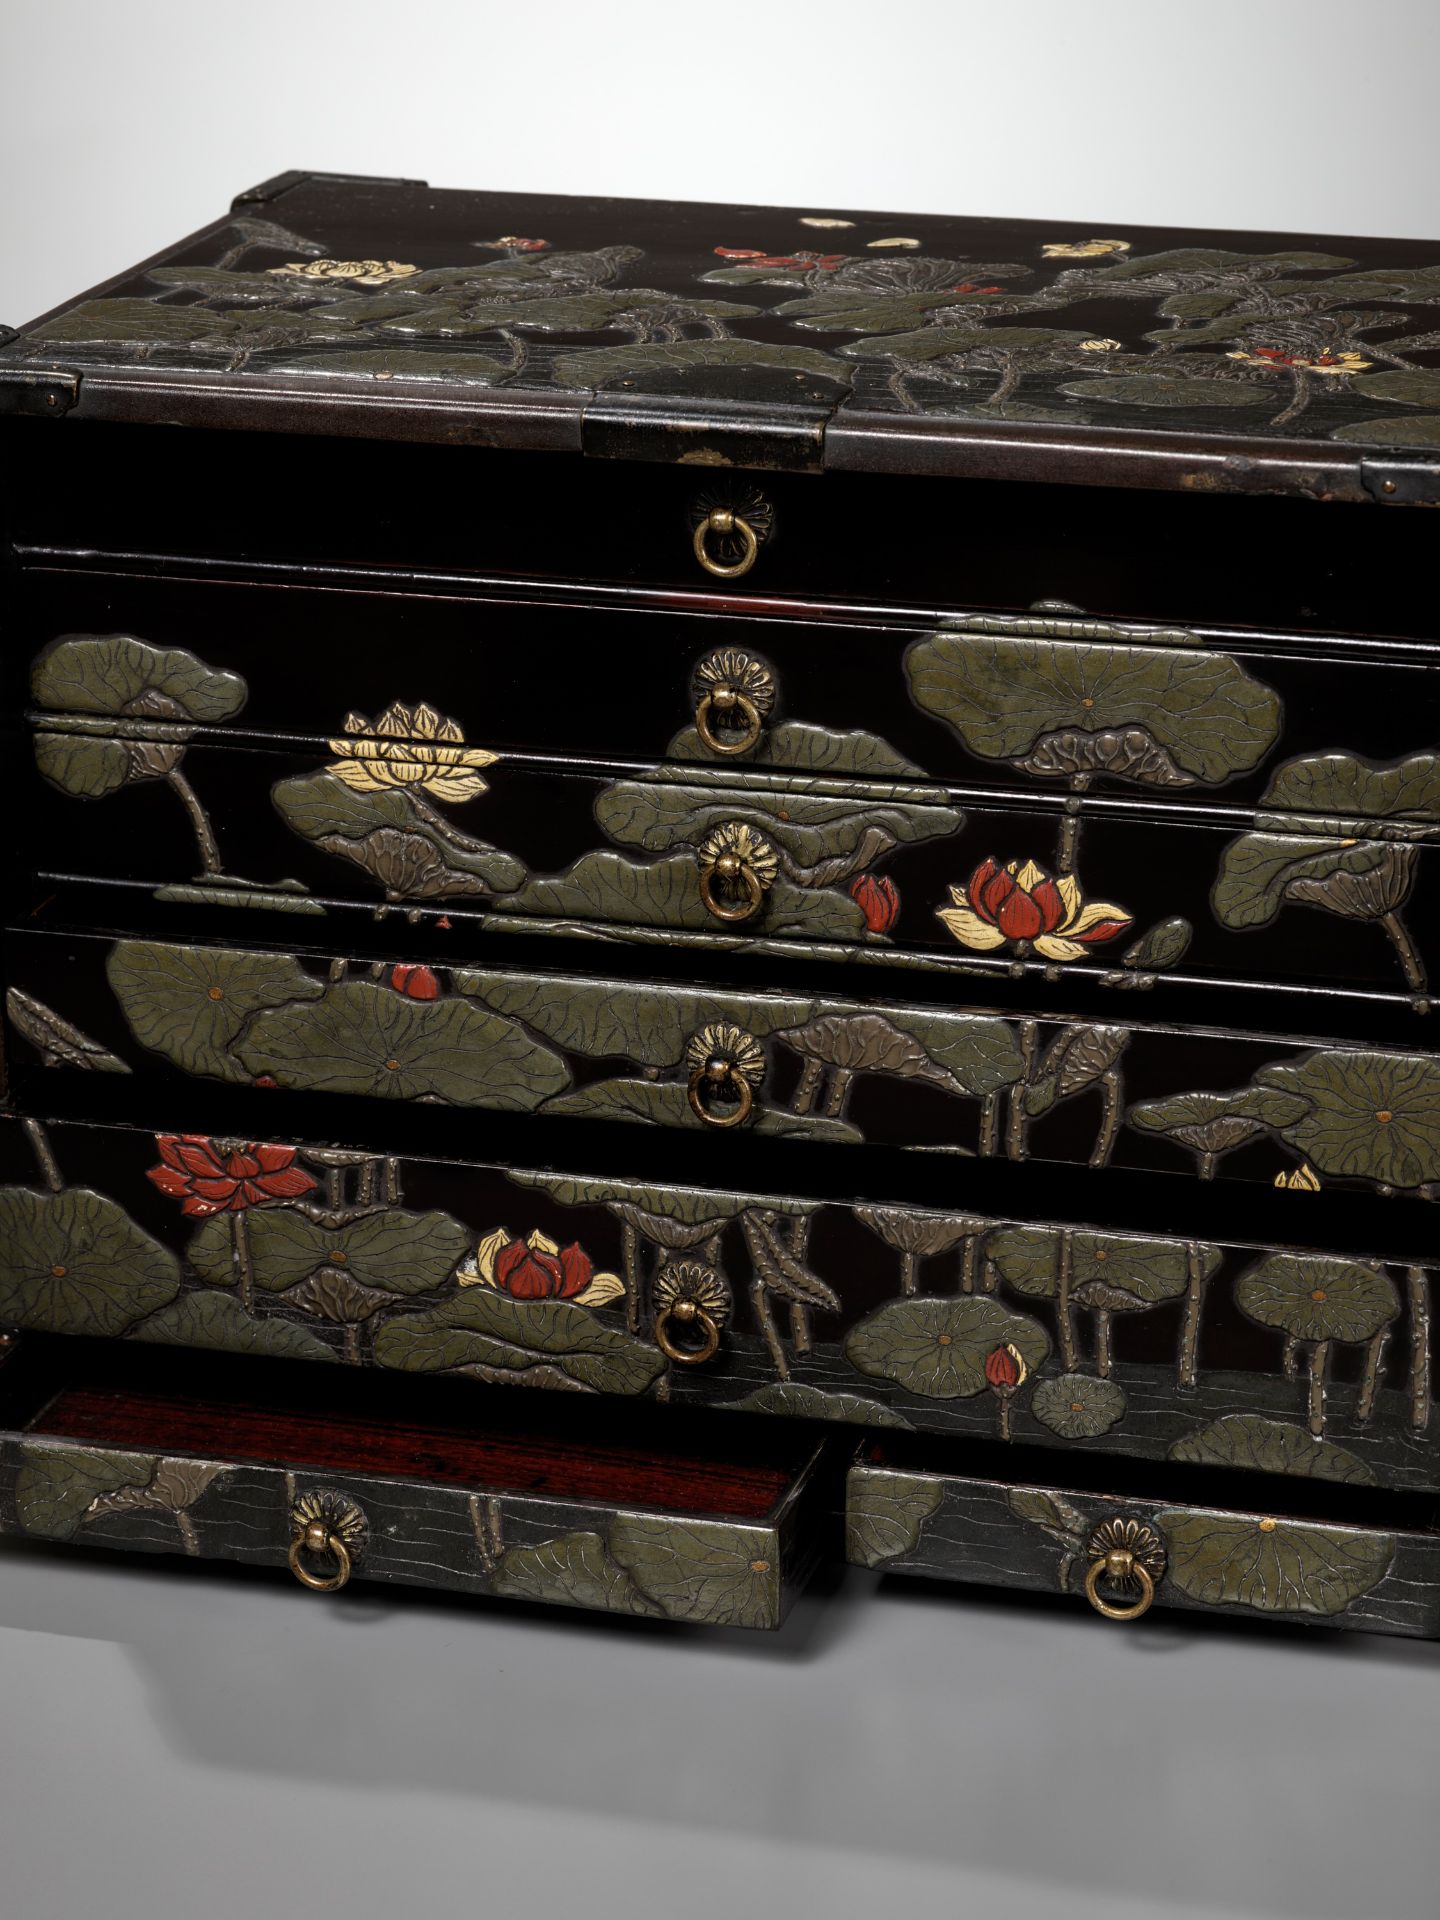 A RITSUO STYLE CERAMIC-INLAID AND LACQUERED WOOD KODANSU (CABINET) WITH A LOTUS POND AND EGRETS - Image 6 of 14